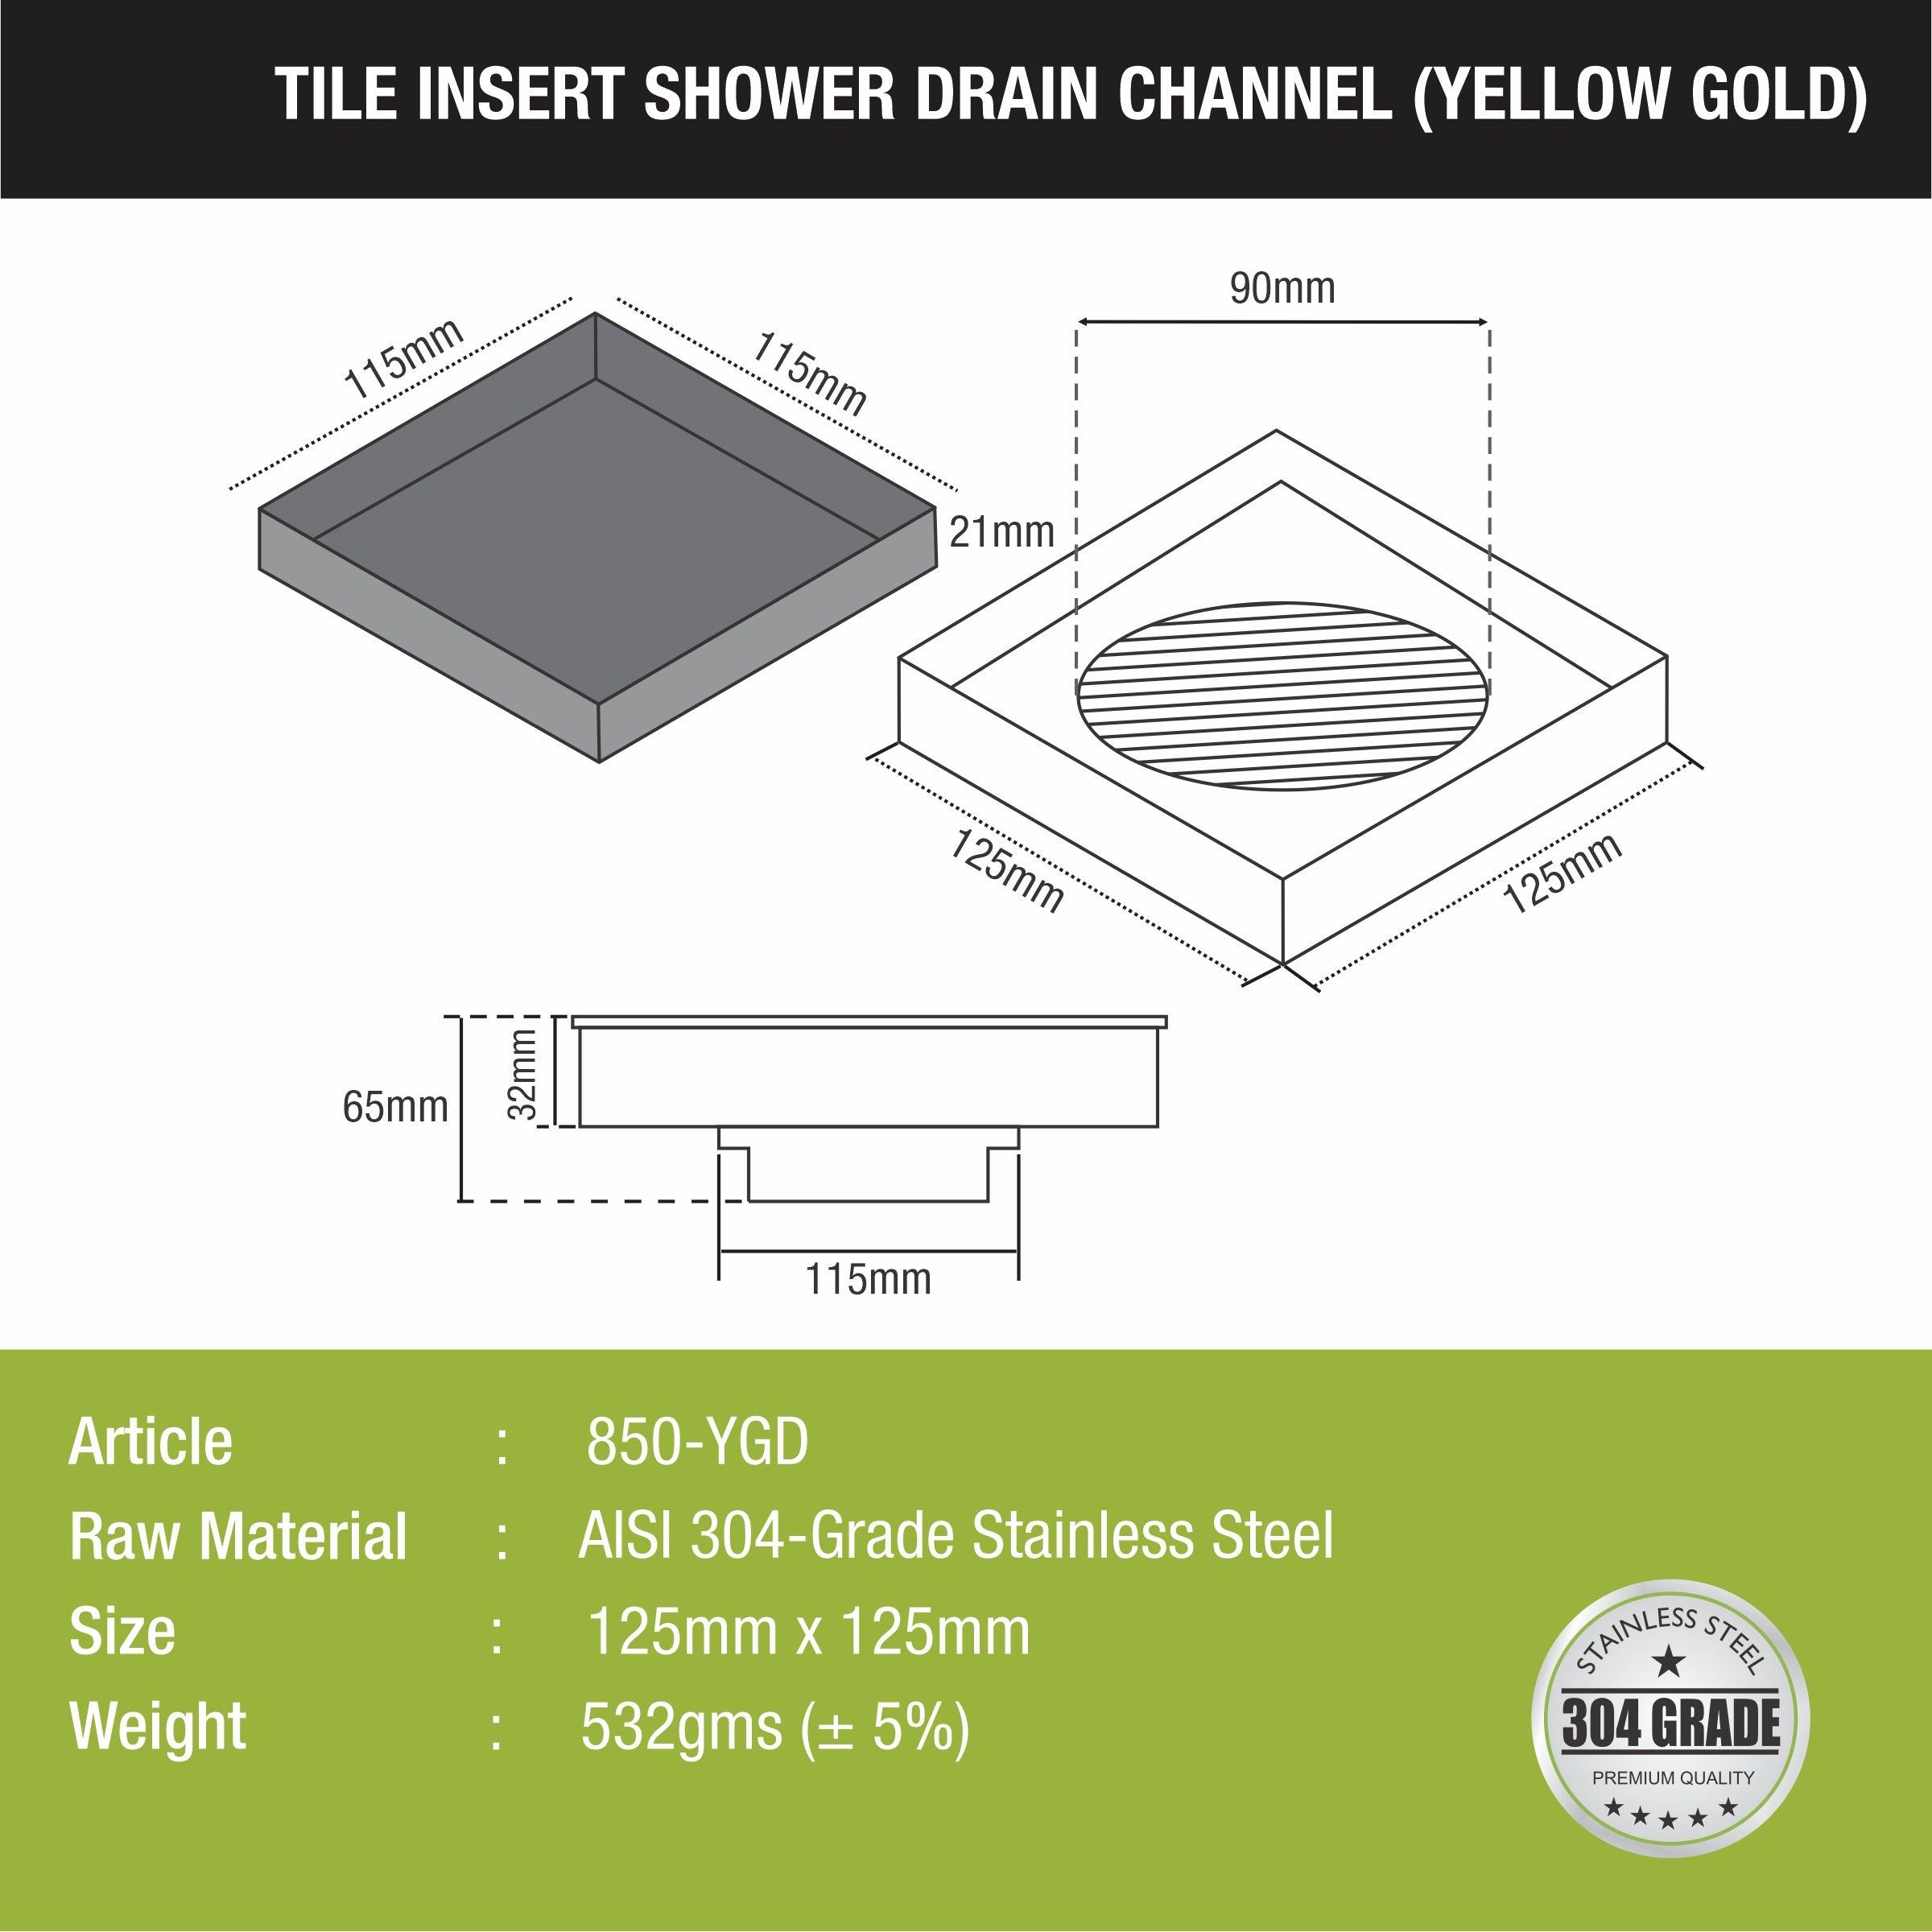 Tile Insert Square Floor Drain - Yellow Gold (5 x 5 Inches) sizes and dimensions